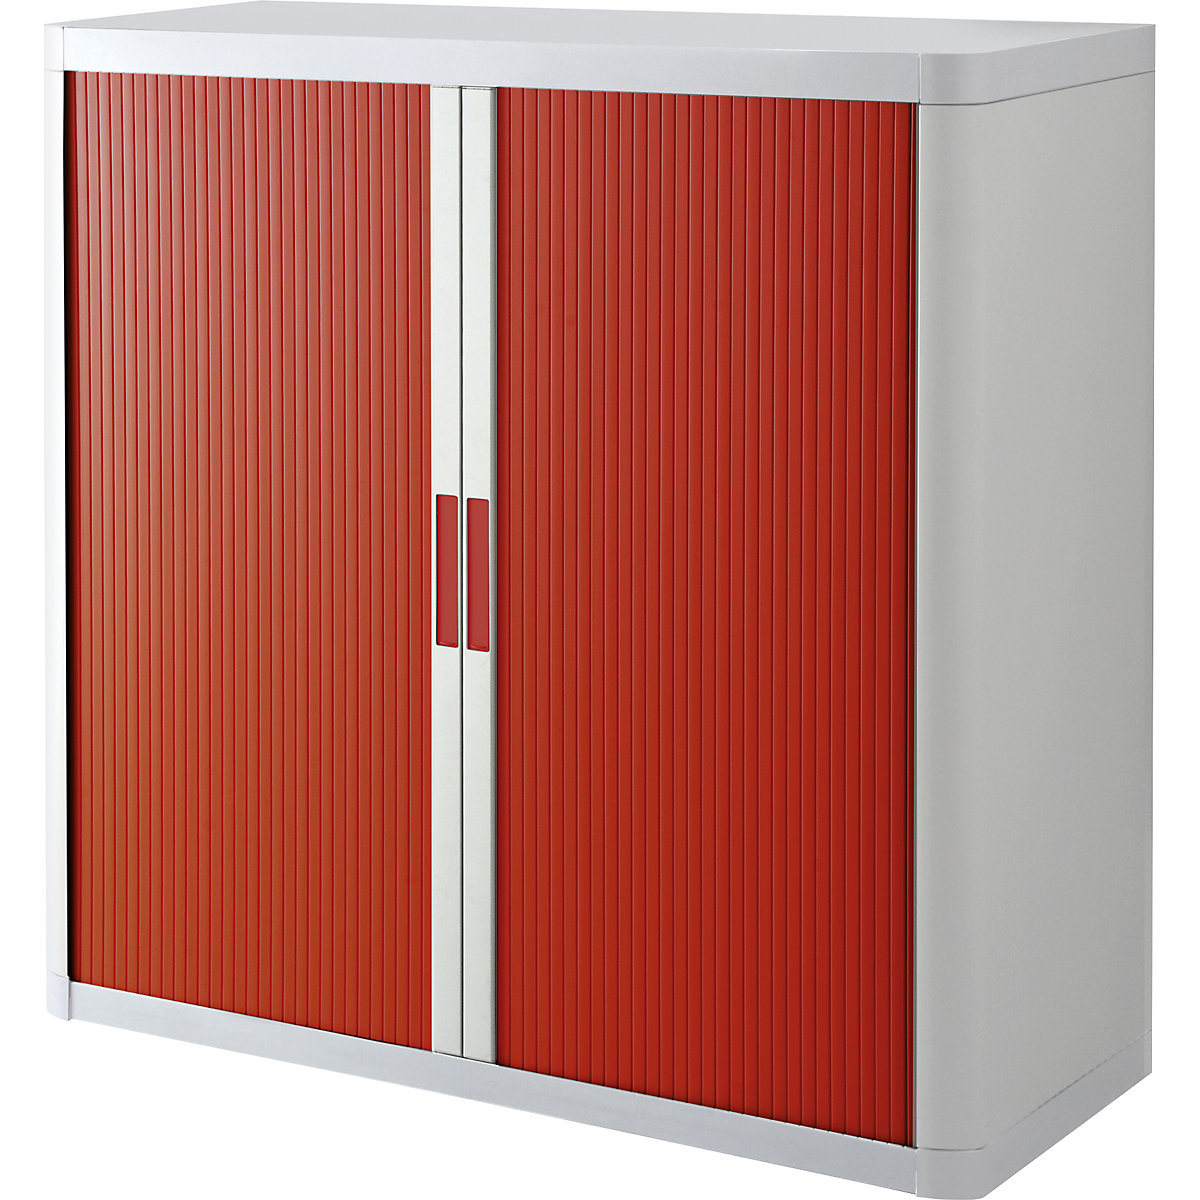 easyOffice® roller shutter cupboard – Paperflow, 2 shelves, height 1040 mm, white / red-14